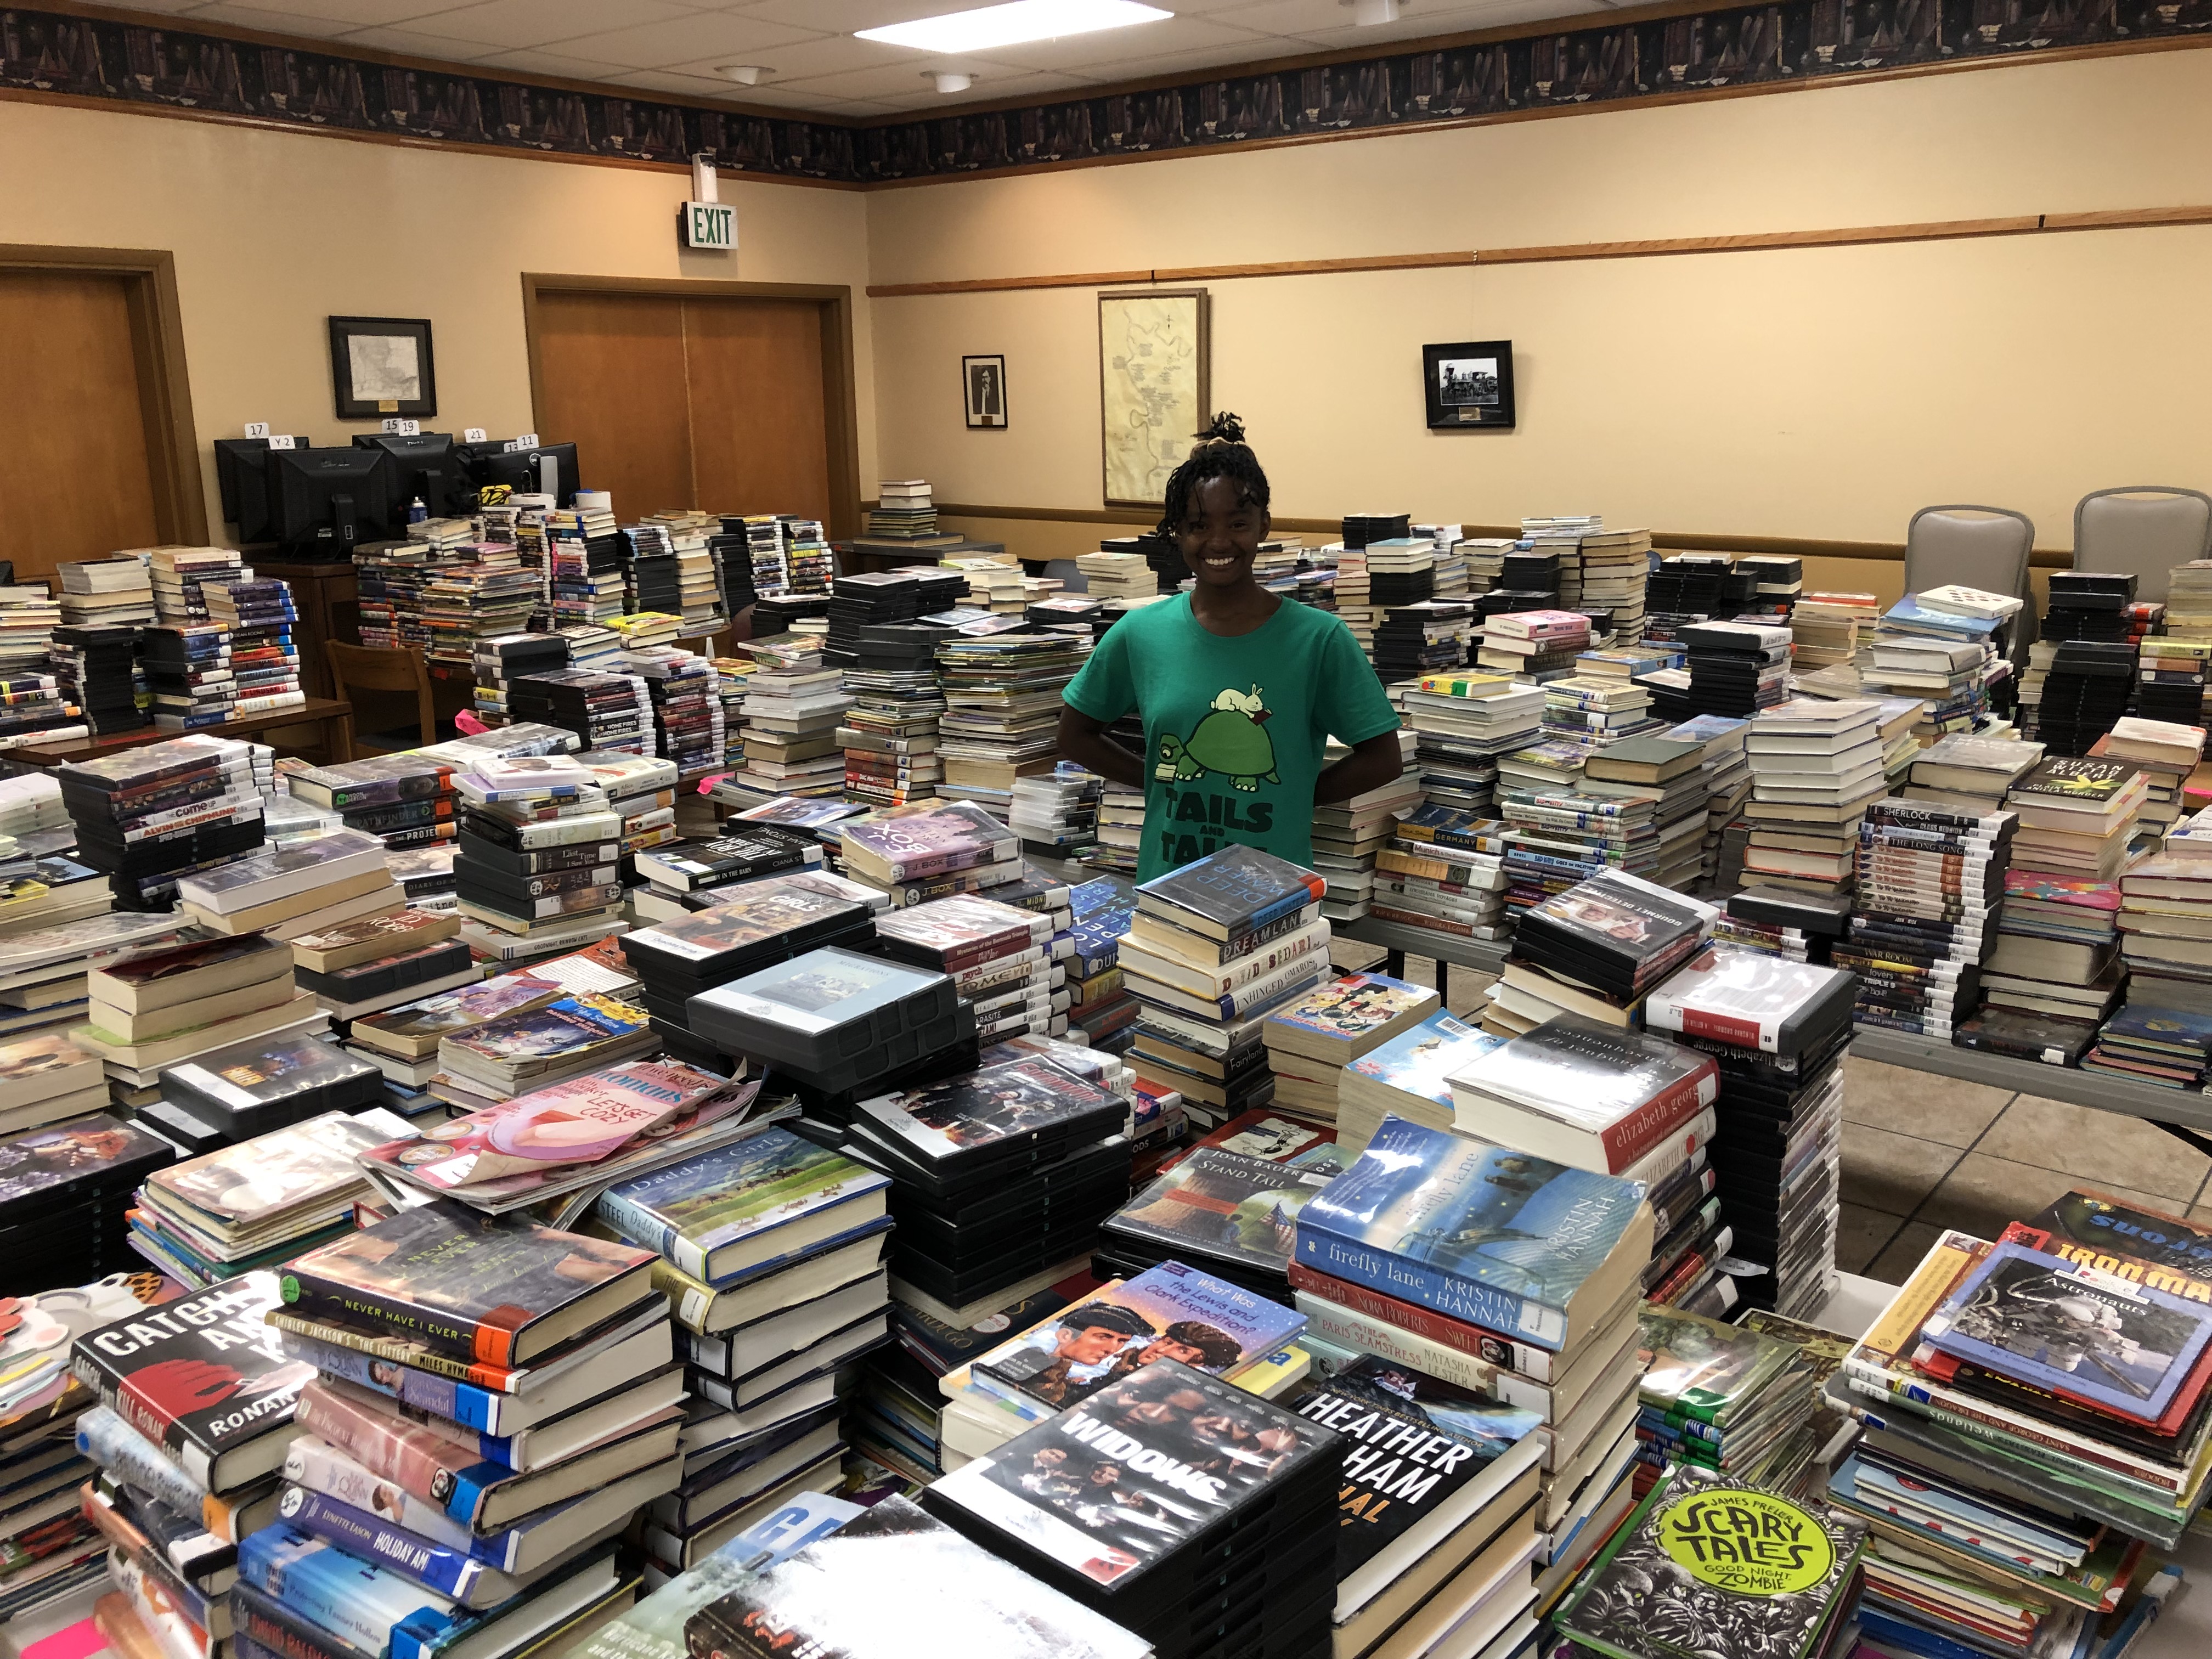 A woman stands in a room surrounded by books.